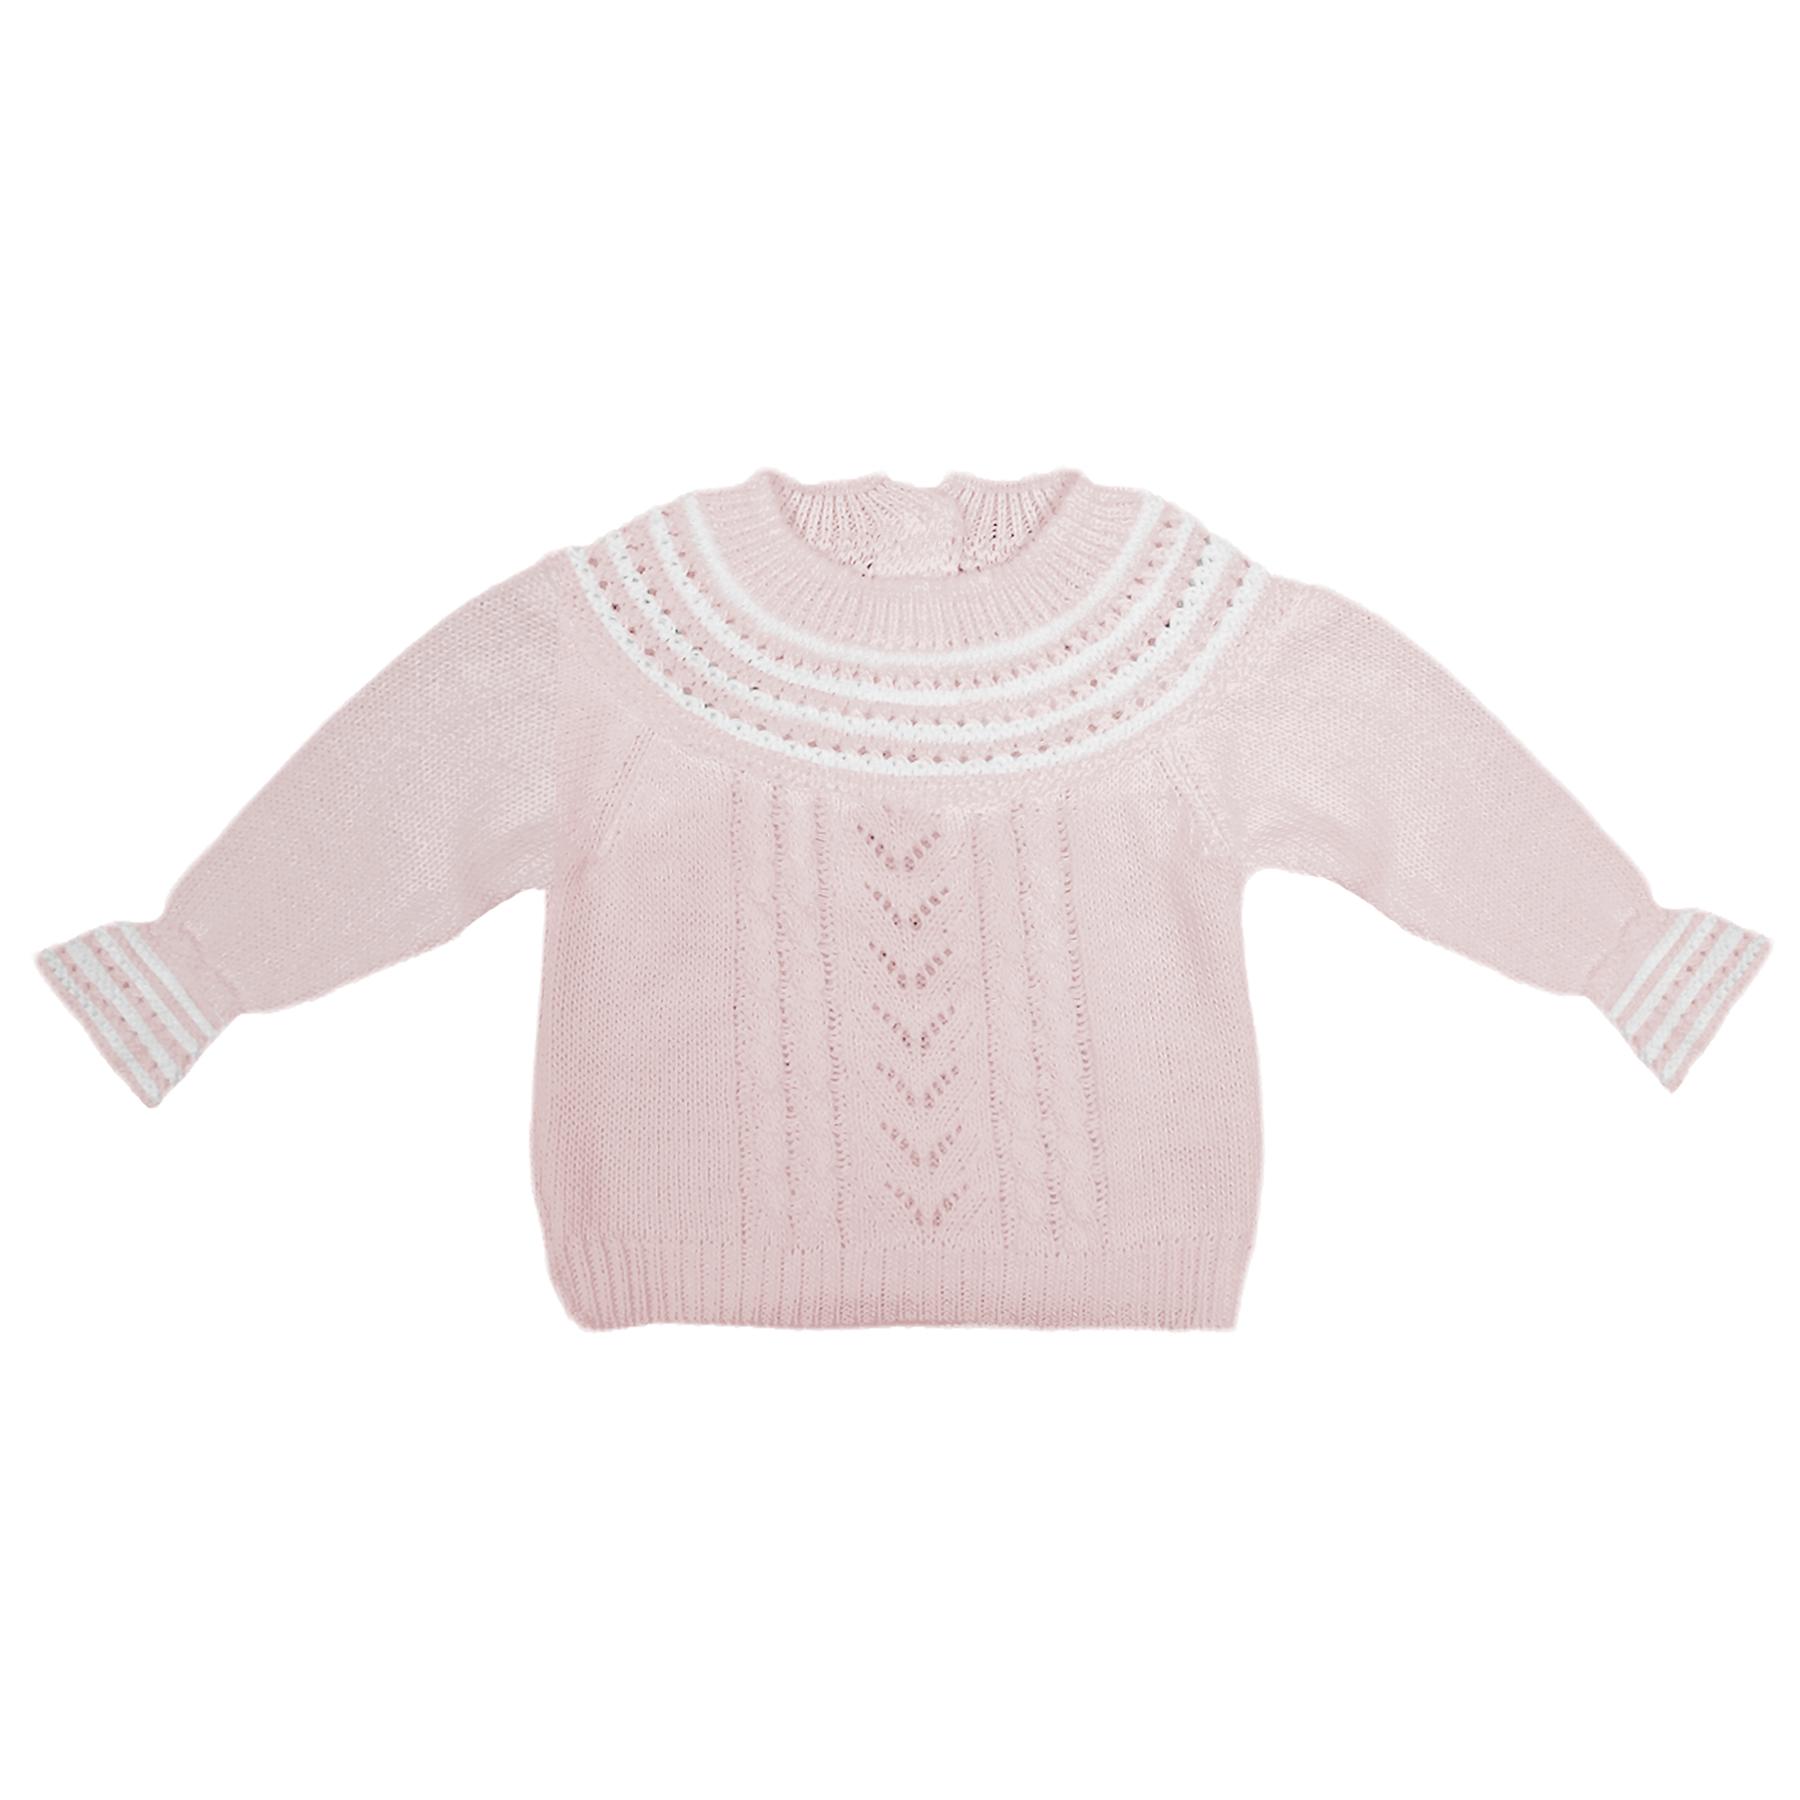 My Little Chick Pink Knitted Top